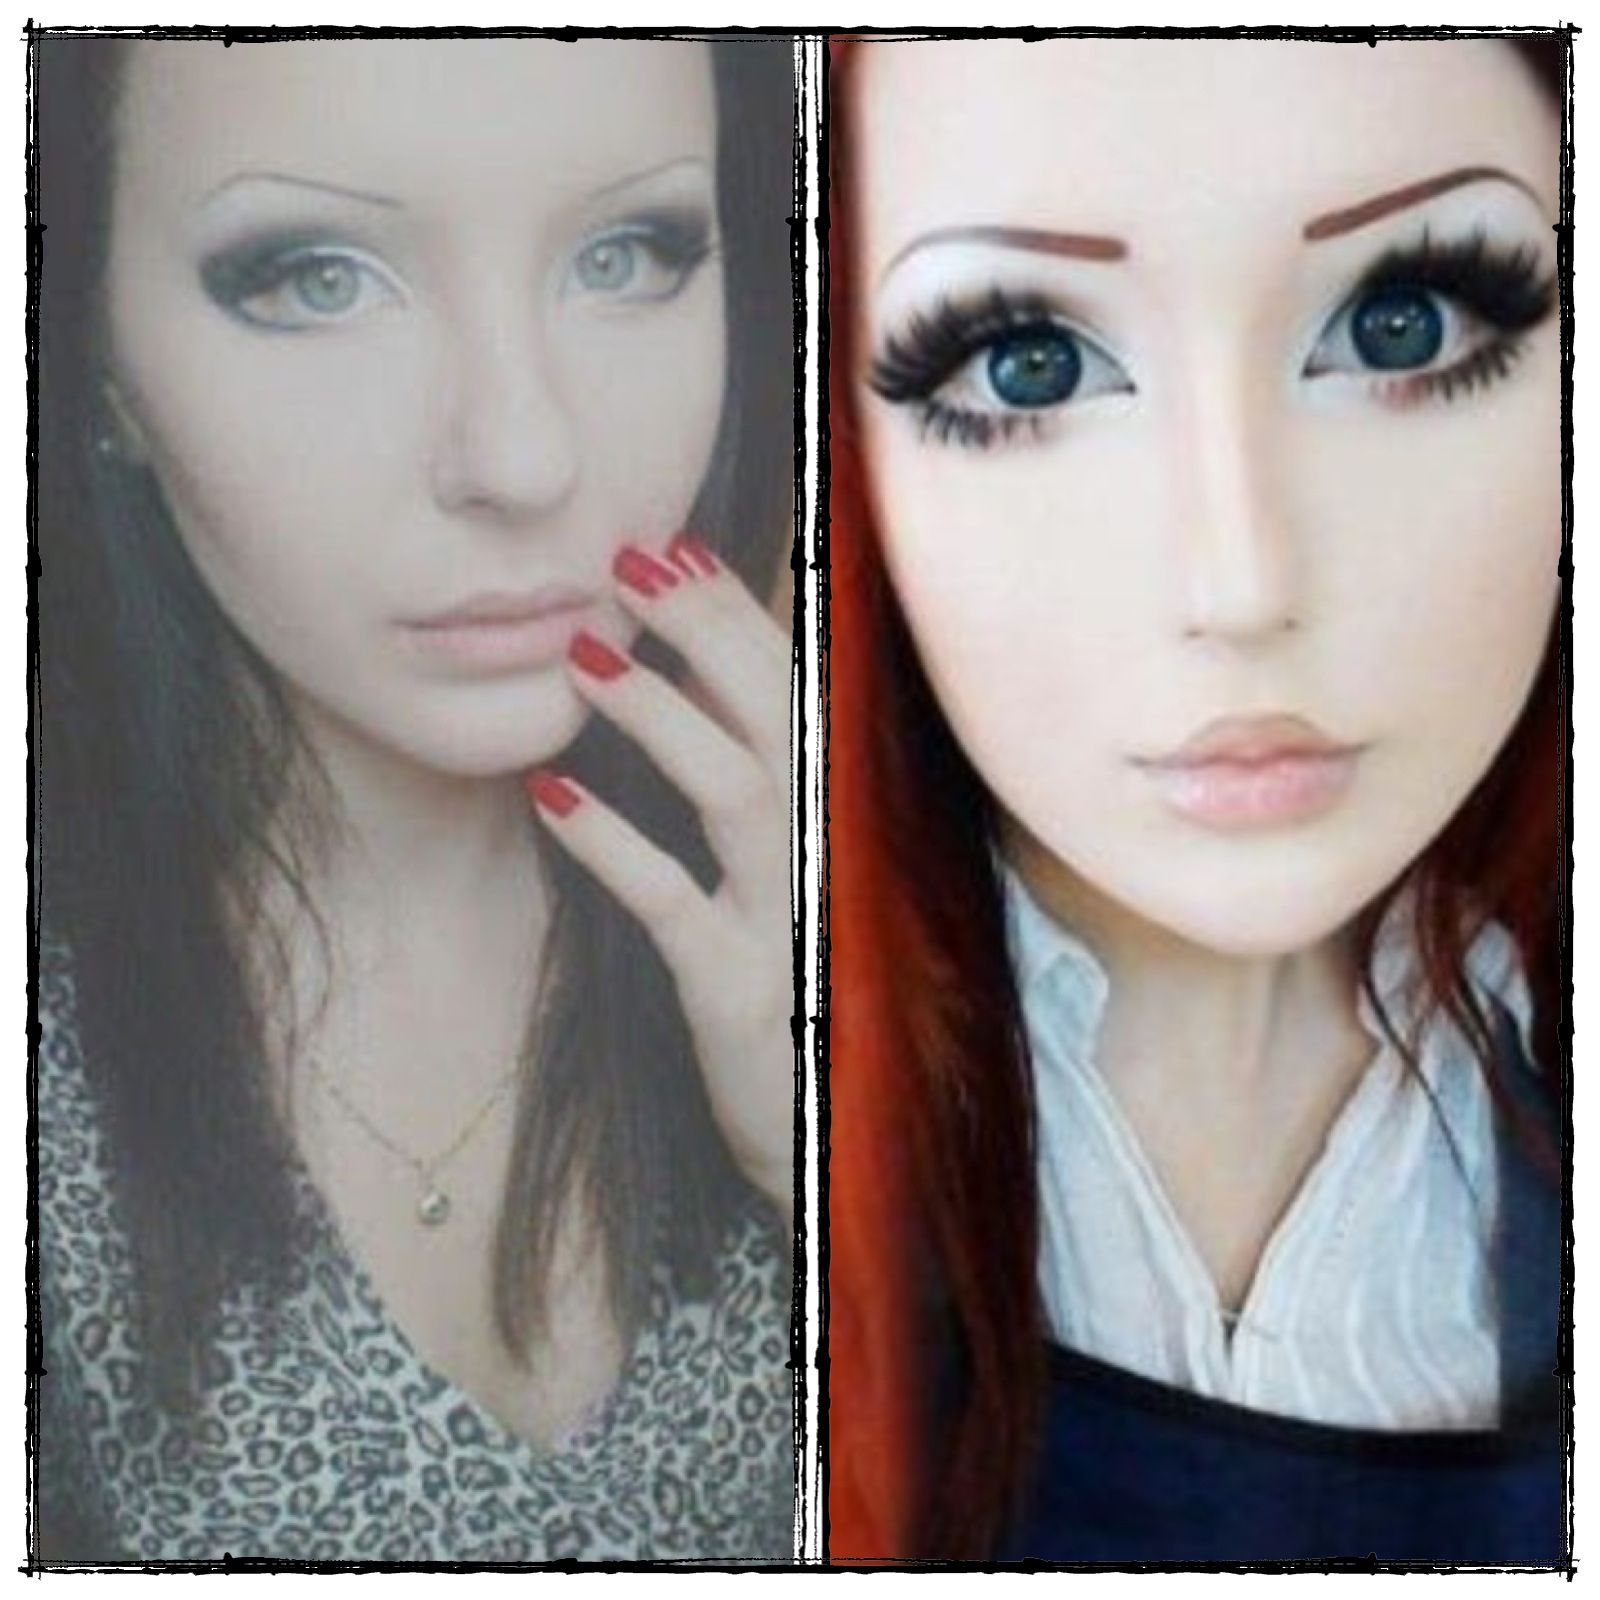 Real life barbie girl before and after